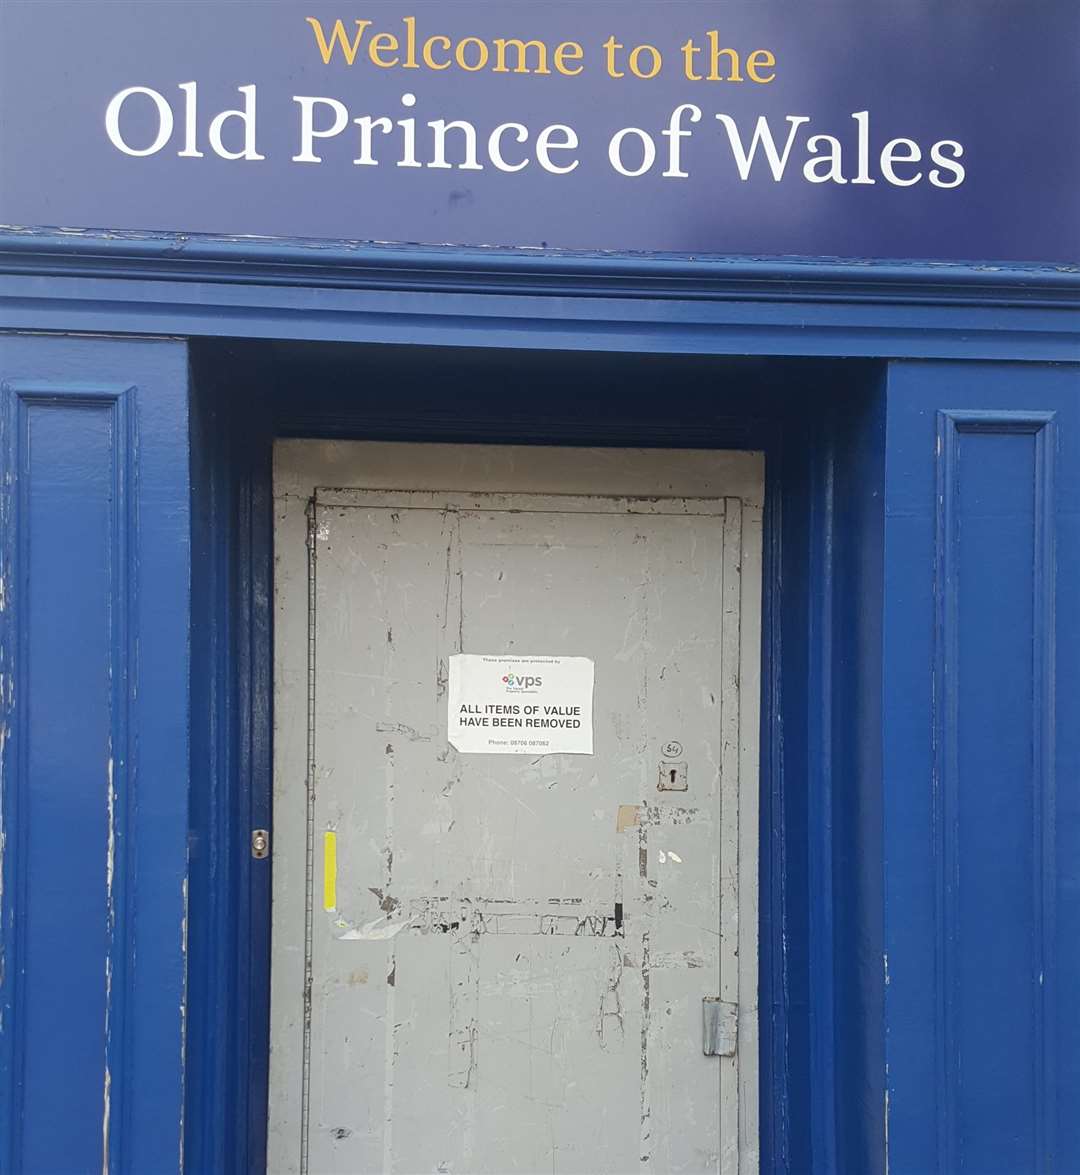 The Old Prince of Wales has been boarded up